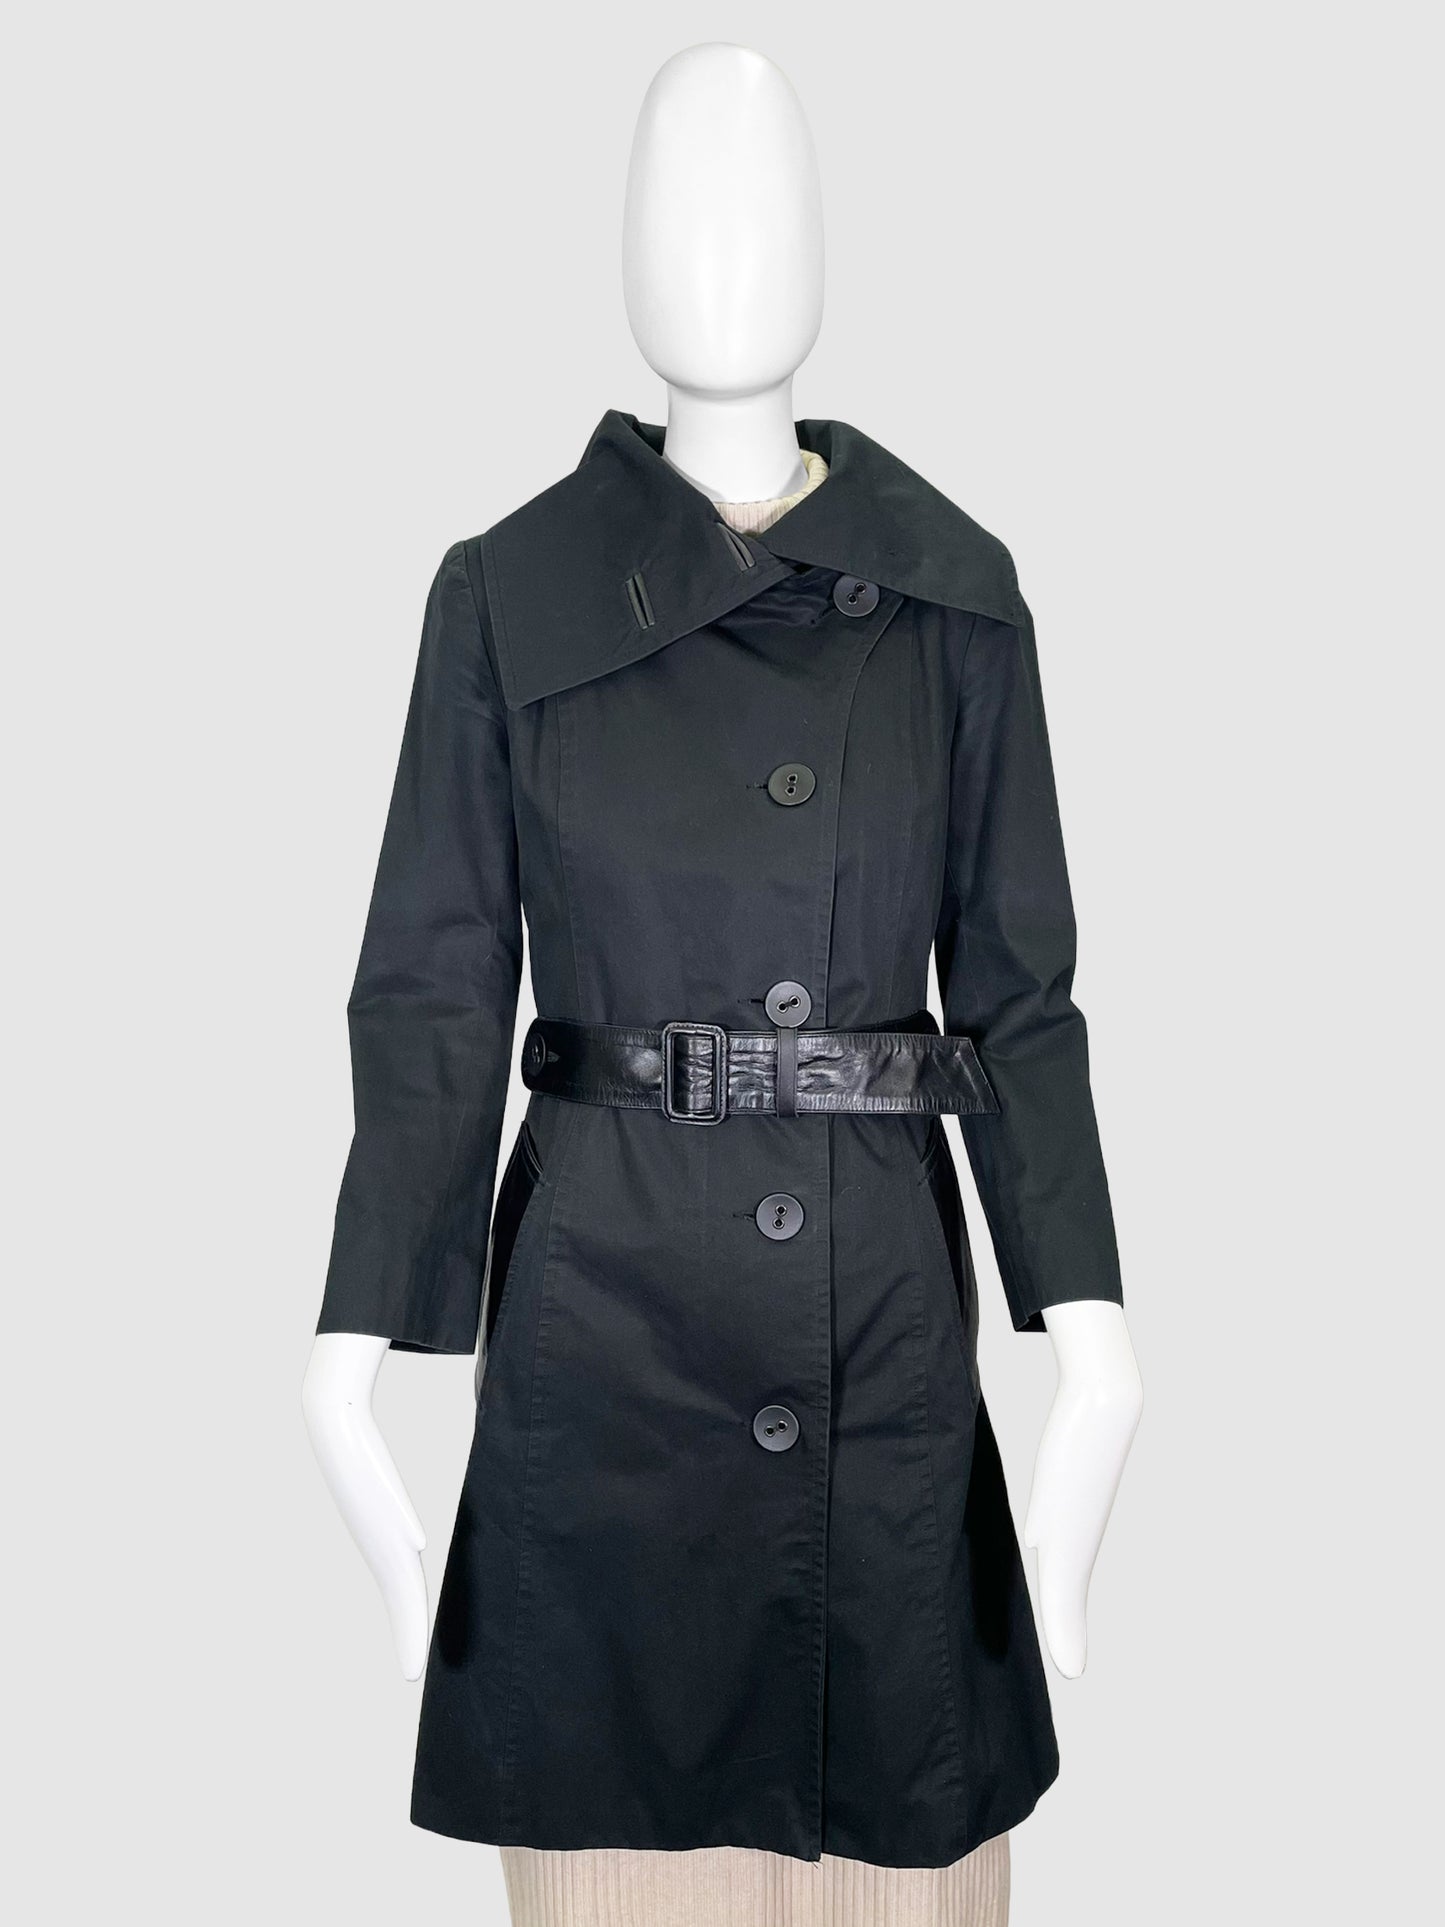 Mackage Trench Coat - Size XS